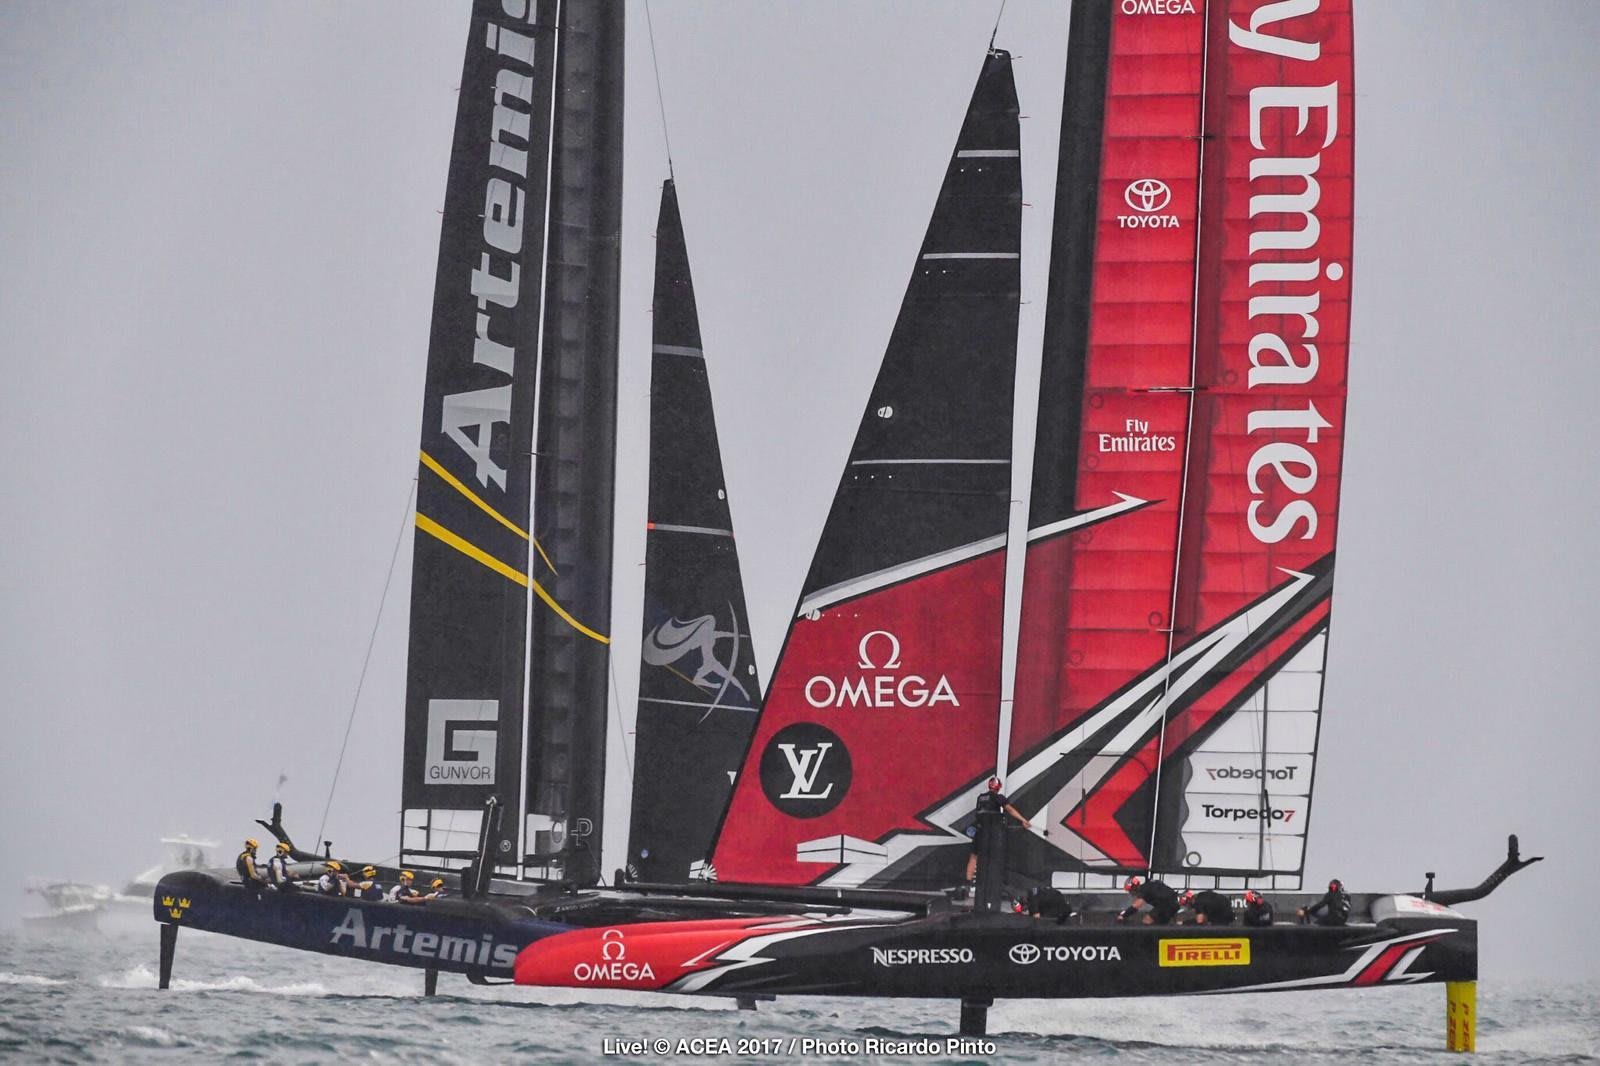 Louis Vuitton extends tie-up with America's Cup, becomes title